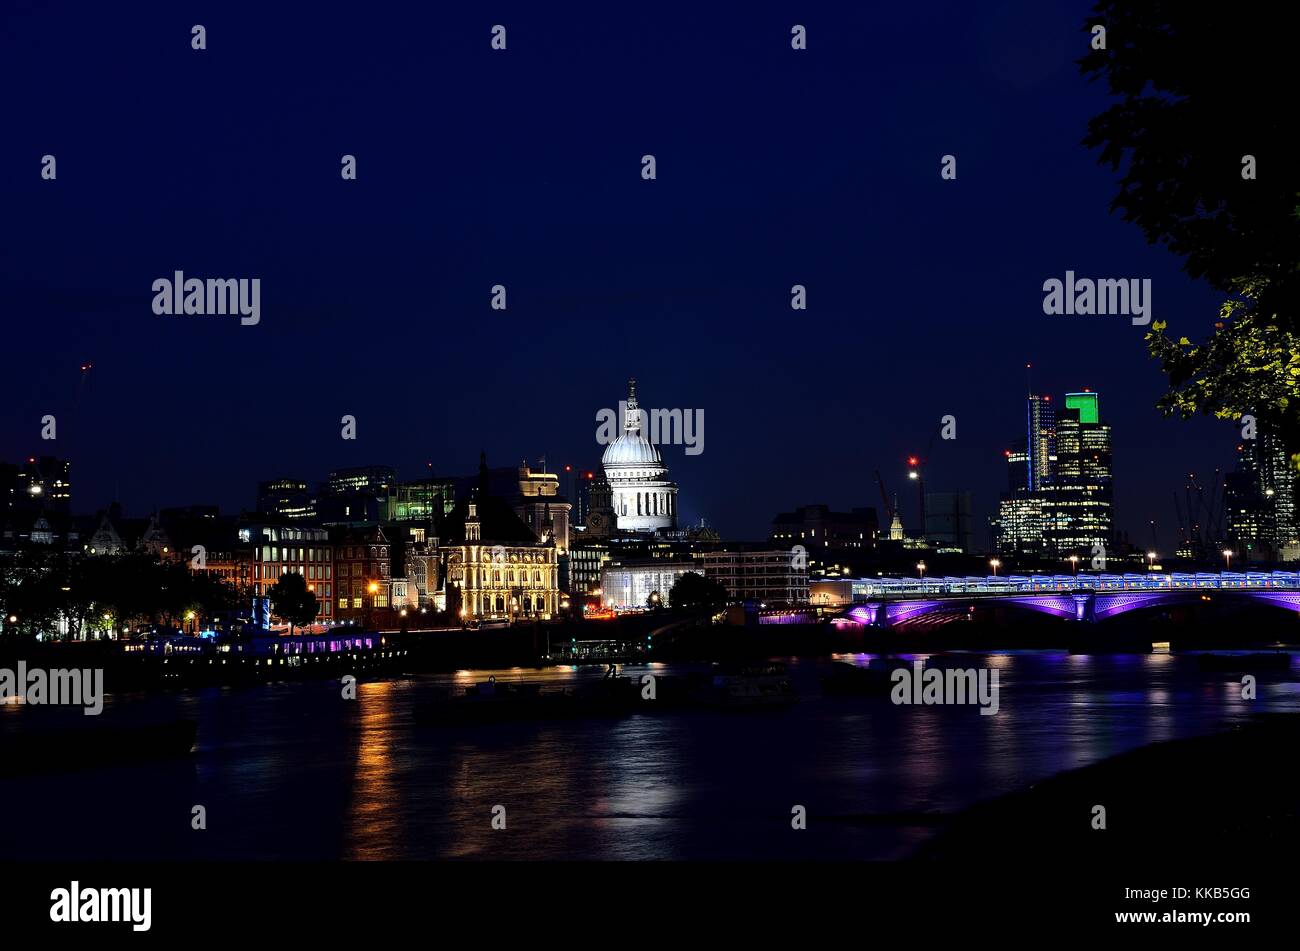 St Pauls Cathedral taken at night photographed from across the Millennium Bridge over the River Thames, giving of some nice reflections. Stock Photo